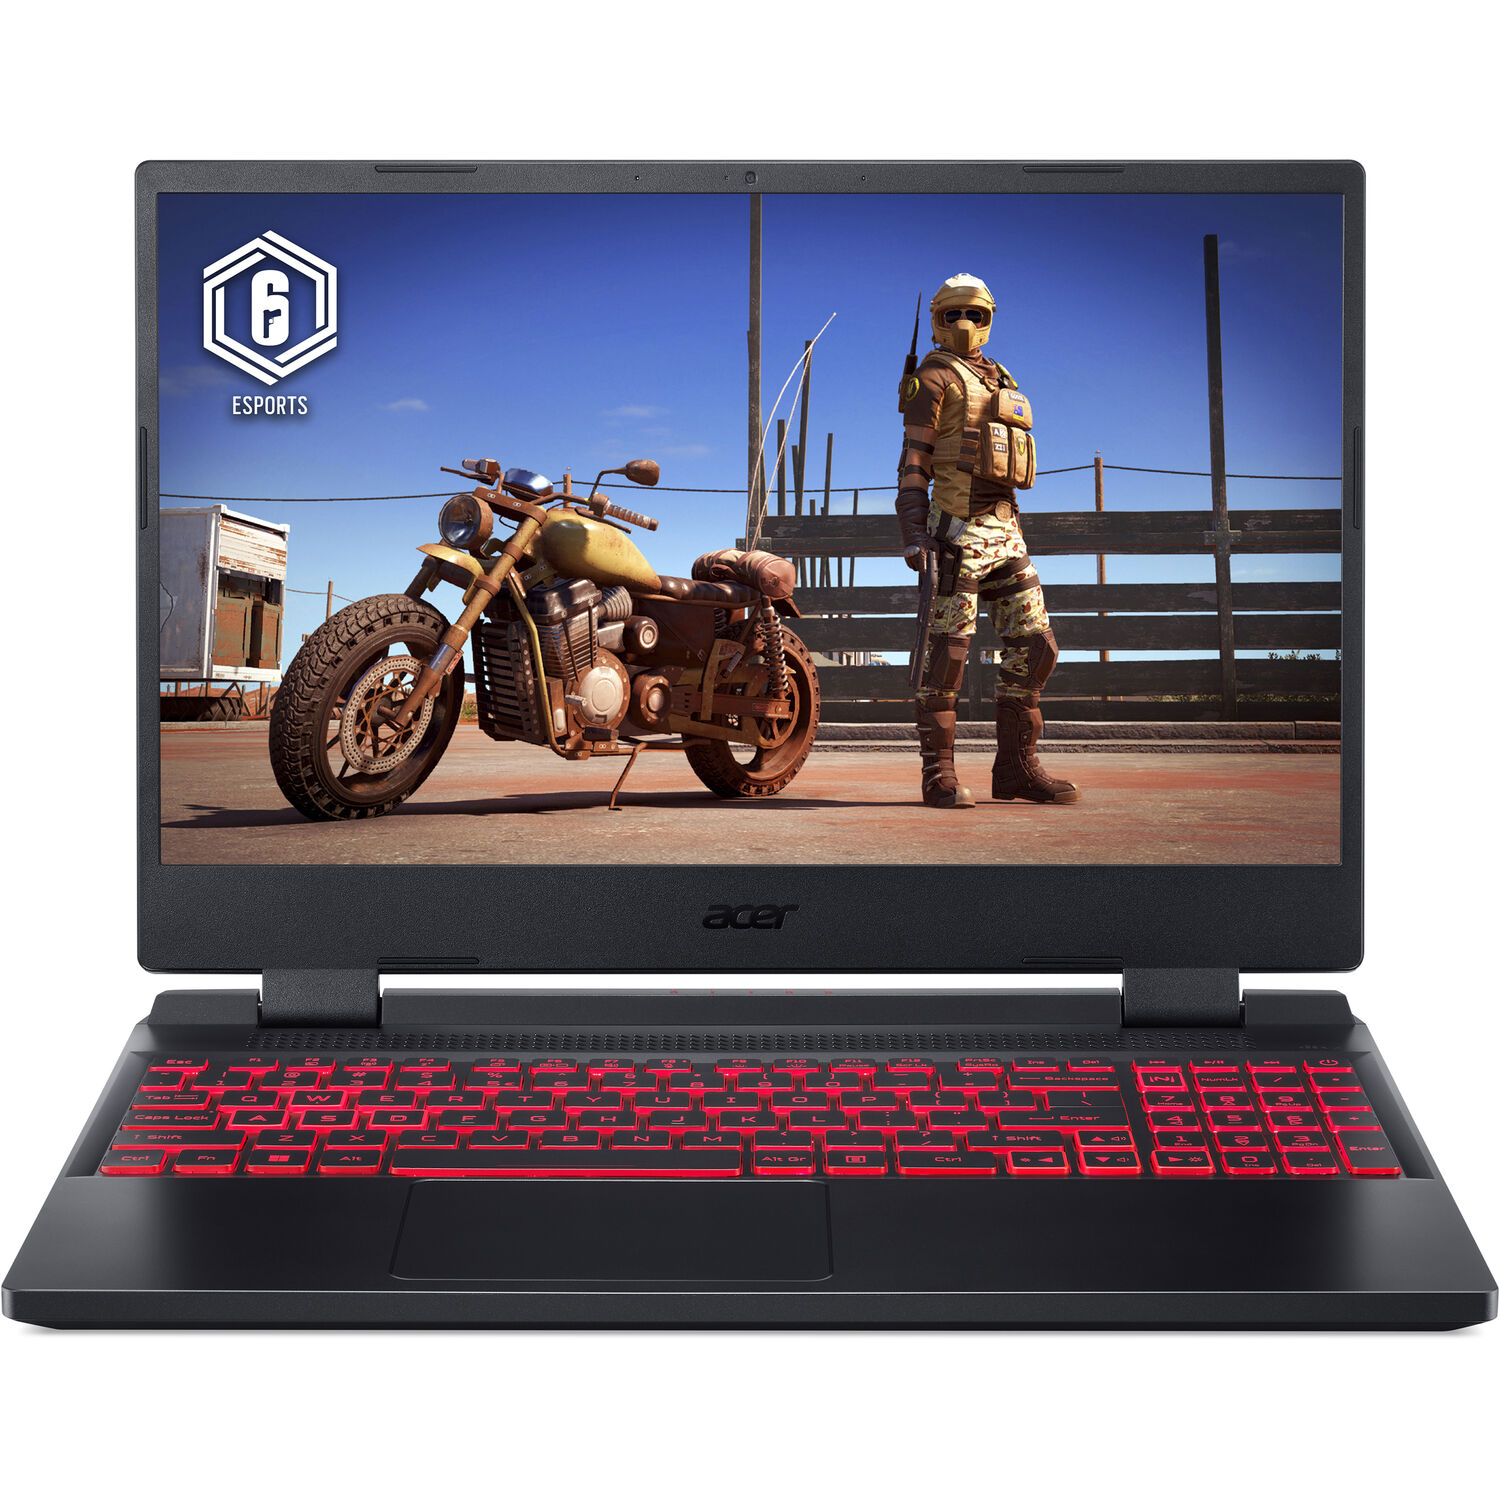 Acer Acer Nitro 5 Gaming/Entertainment Laptop (Intel i5-12500H 12-Core, 17.3in 144Hz Full HD (1920x1080), NVIDIA RTX 3050, 16GB RAM, 1TB PCIe SSD, Backlit KB, Win 11 Home) - image 1 of 7